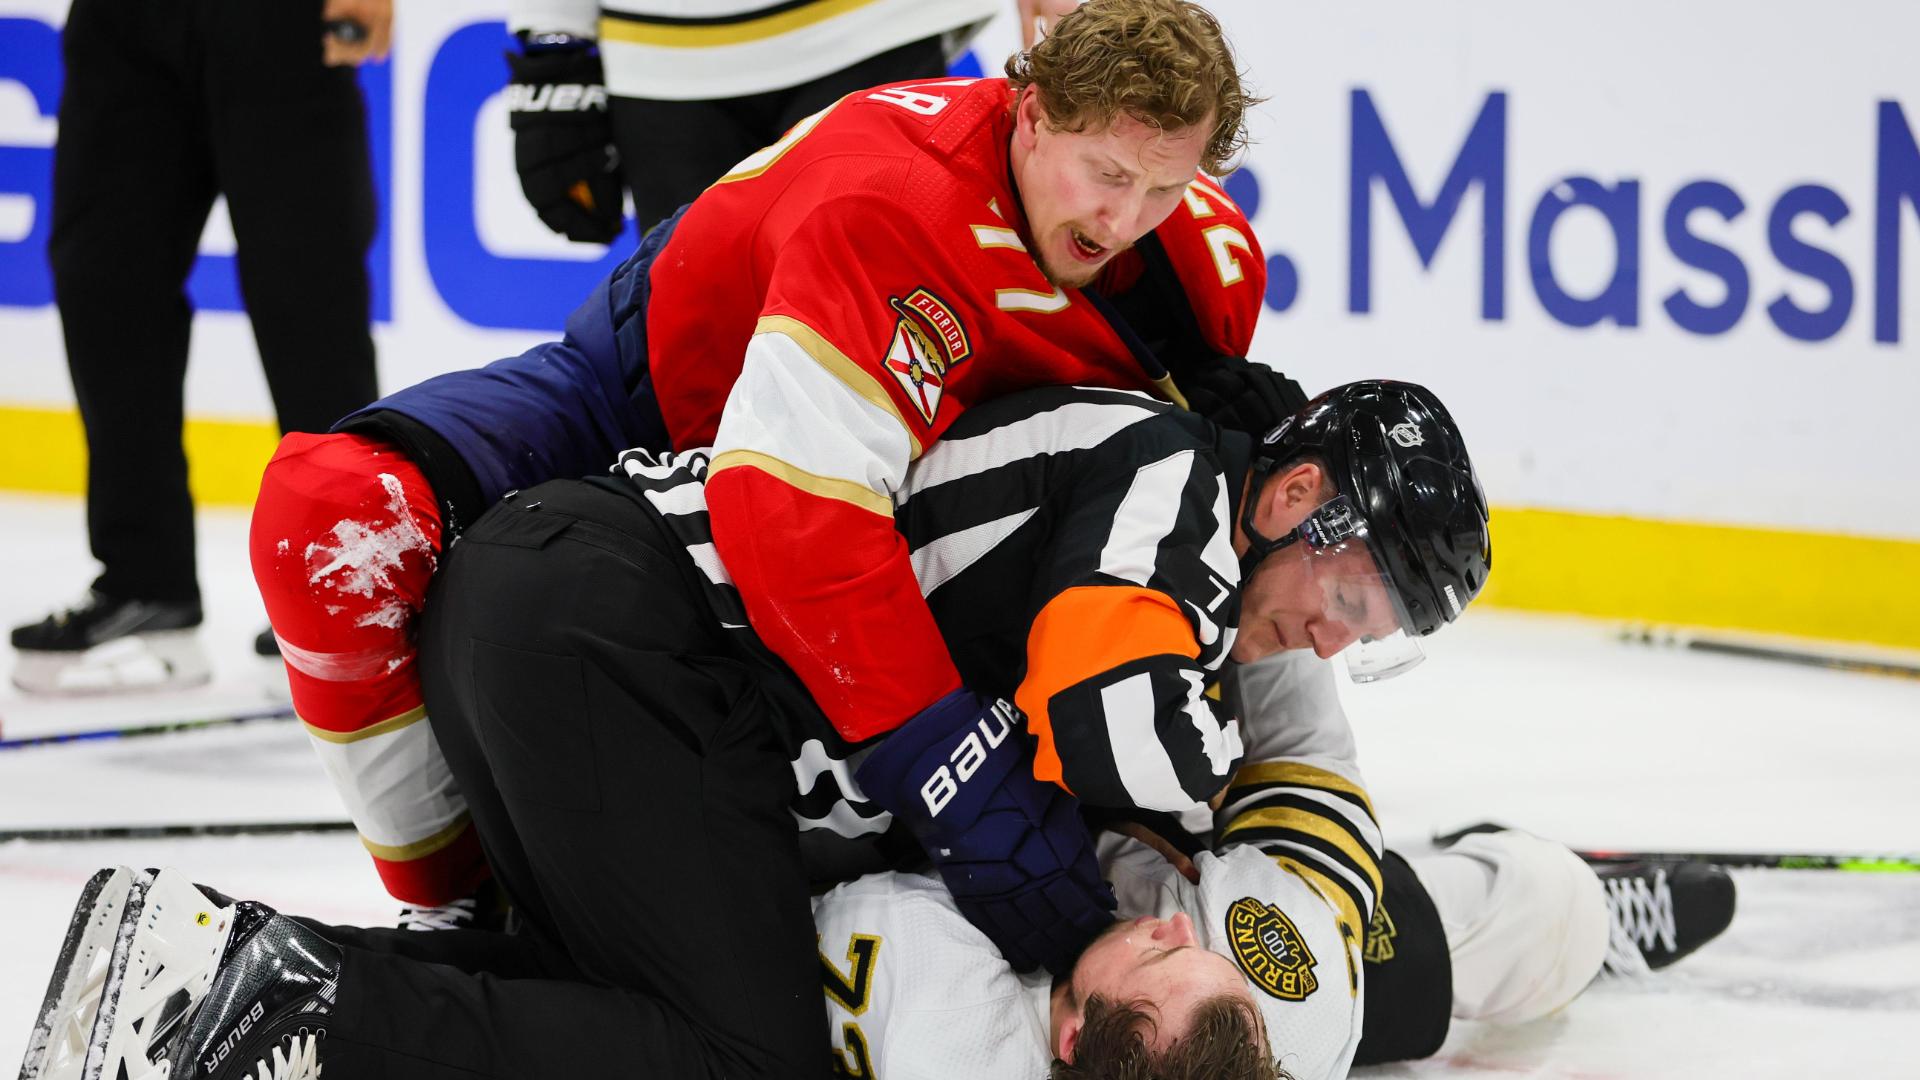 Brawl breaks out after Panthers score 6th goal of the game